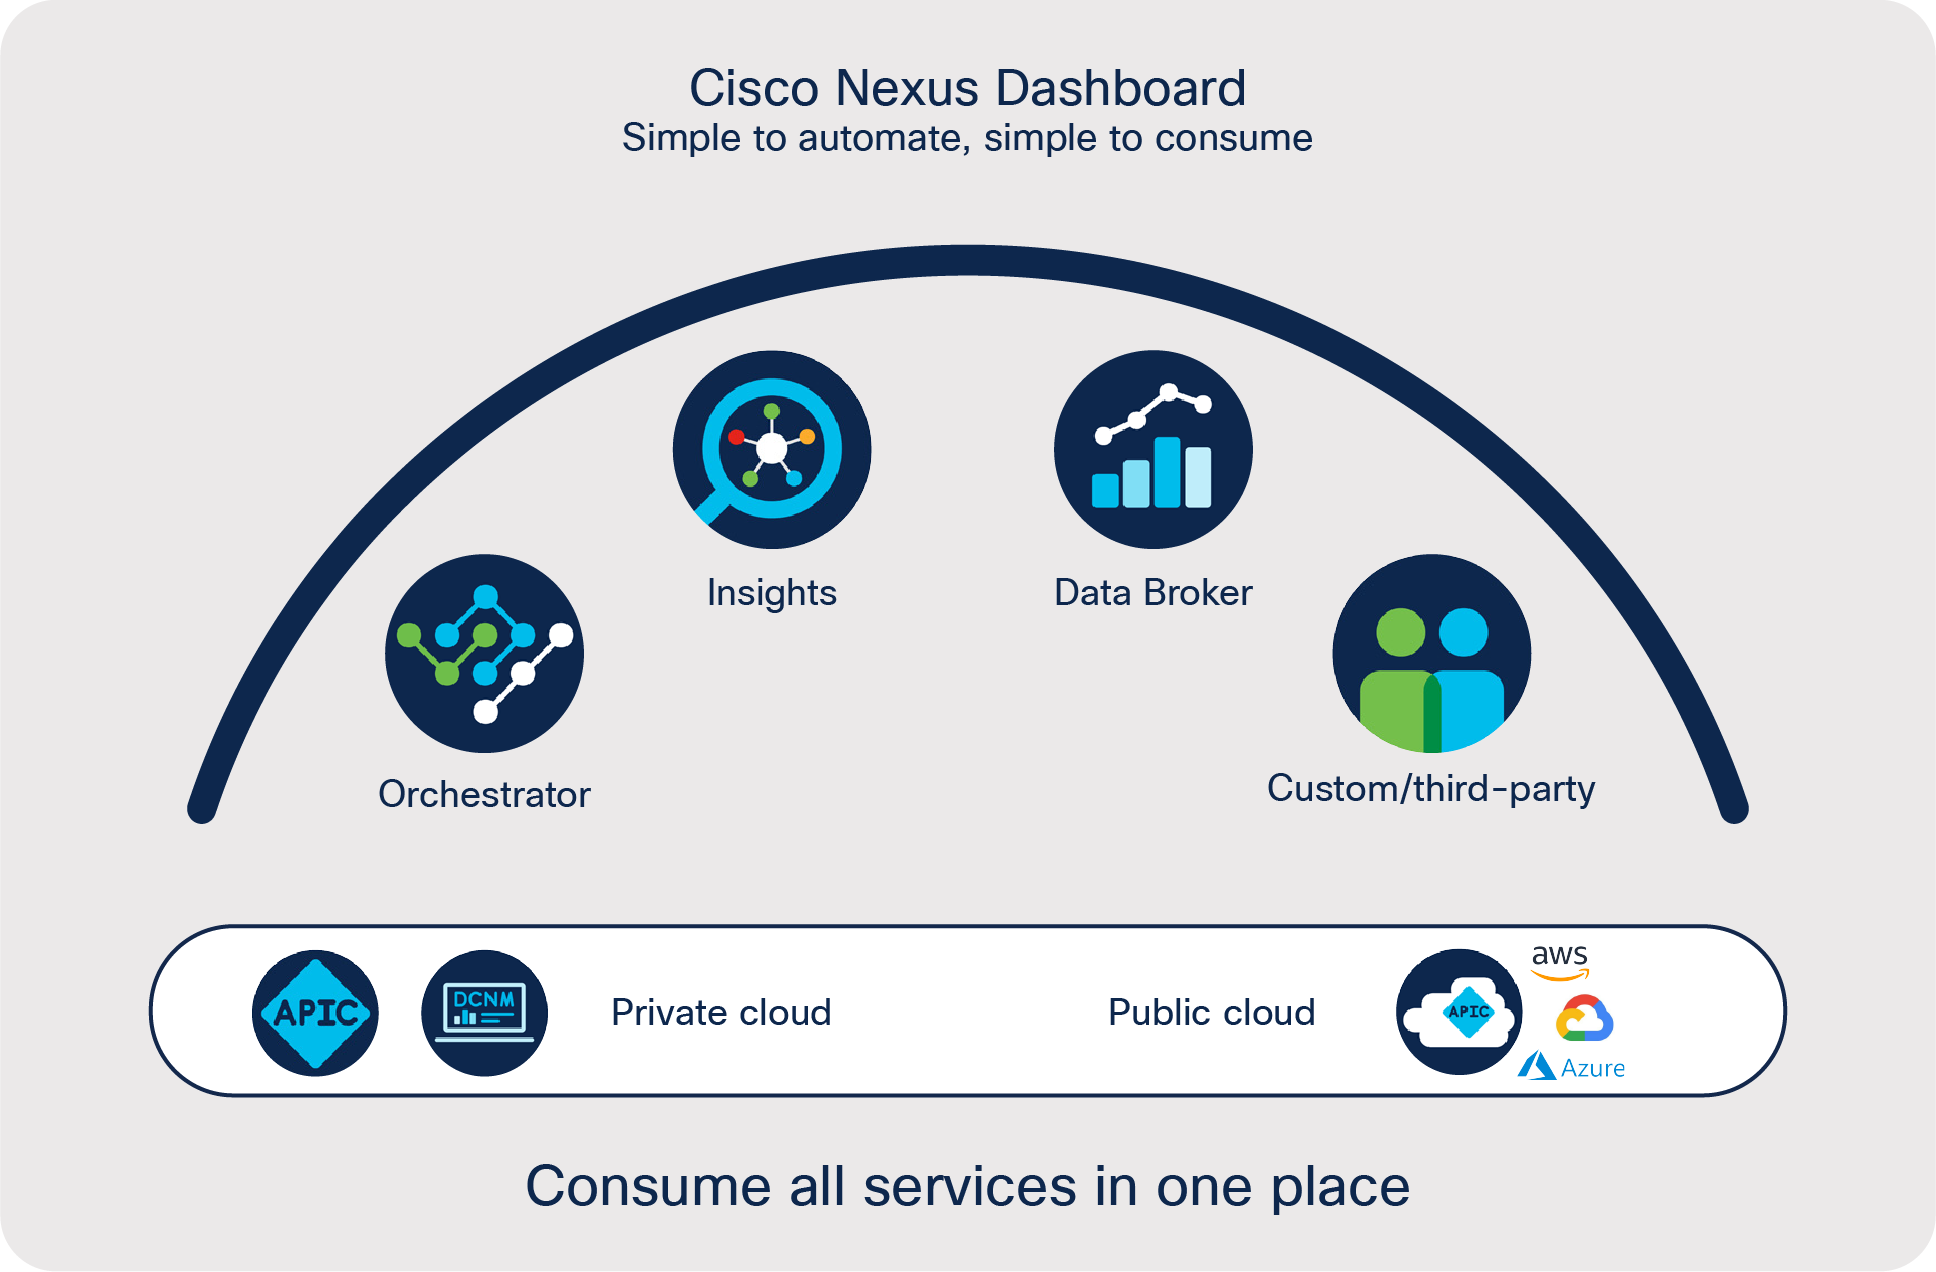 The Cisco Nexus Dashboard combines powerful services together in one platform